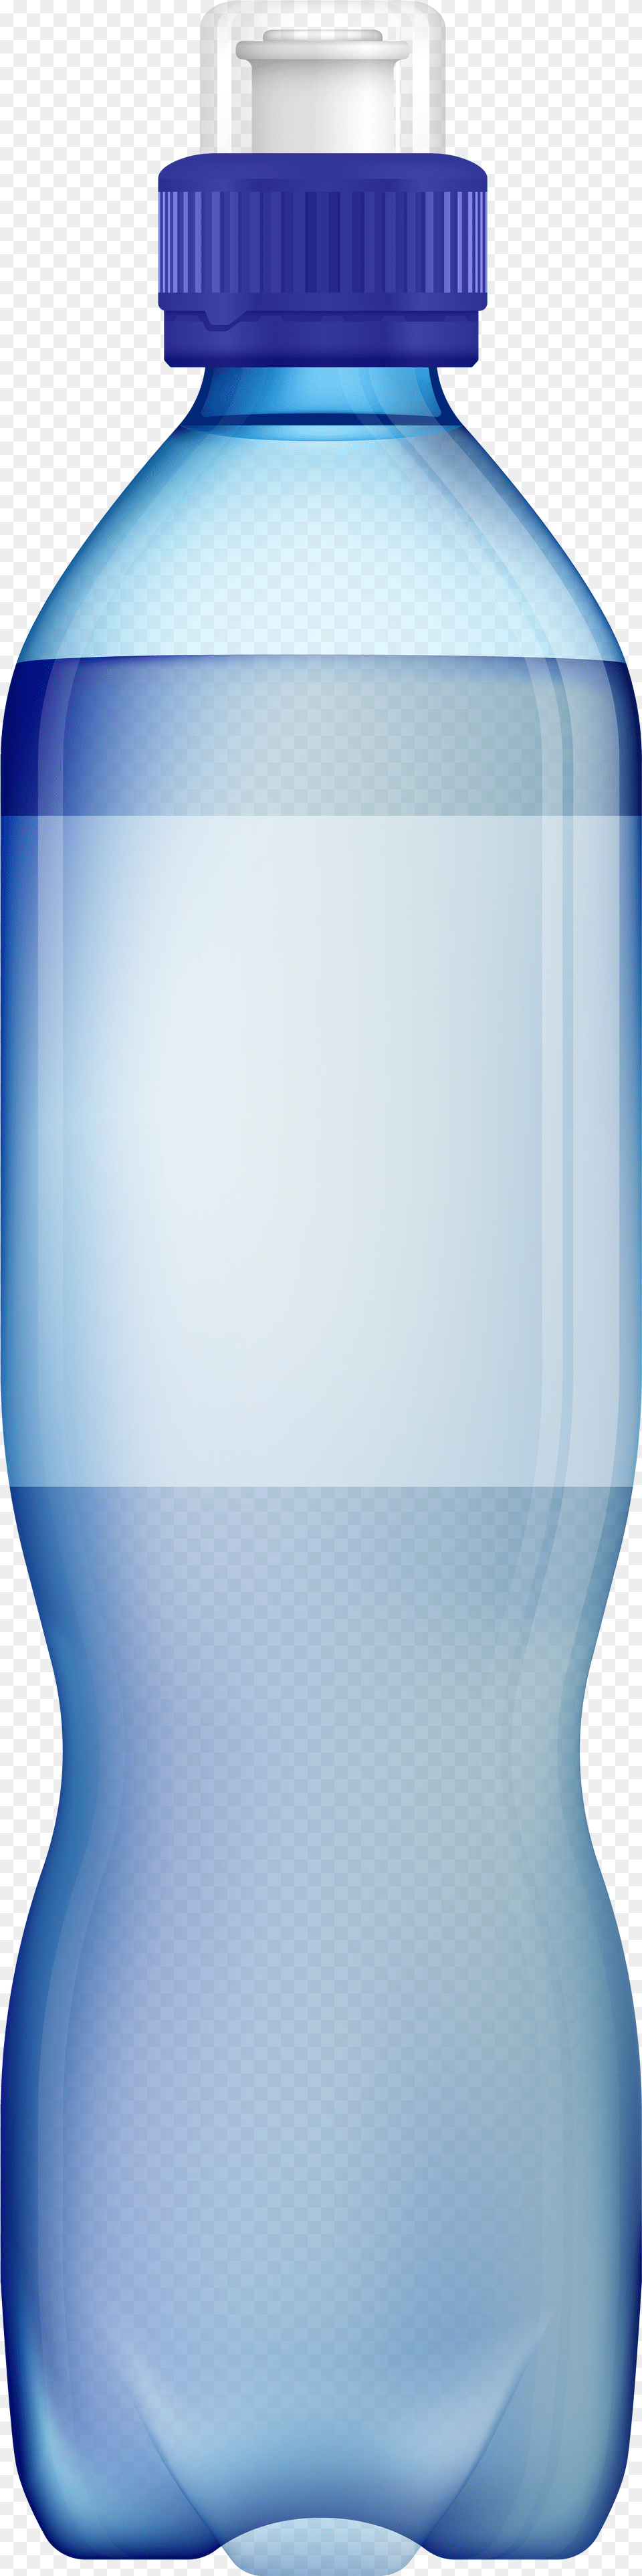 Cup Clipart Water Water Bottles Clipart, Bottle, Water Bottle, Beverage, Mineral Water Png